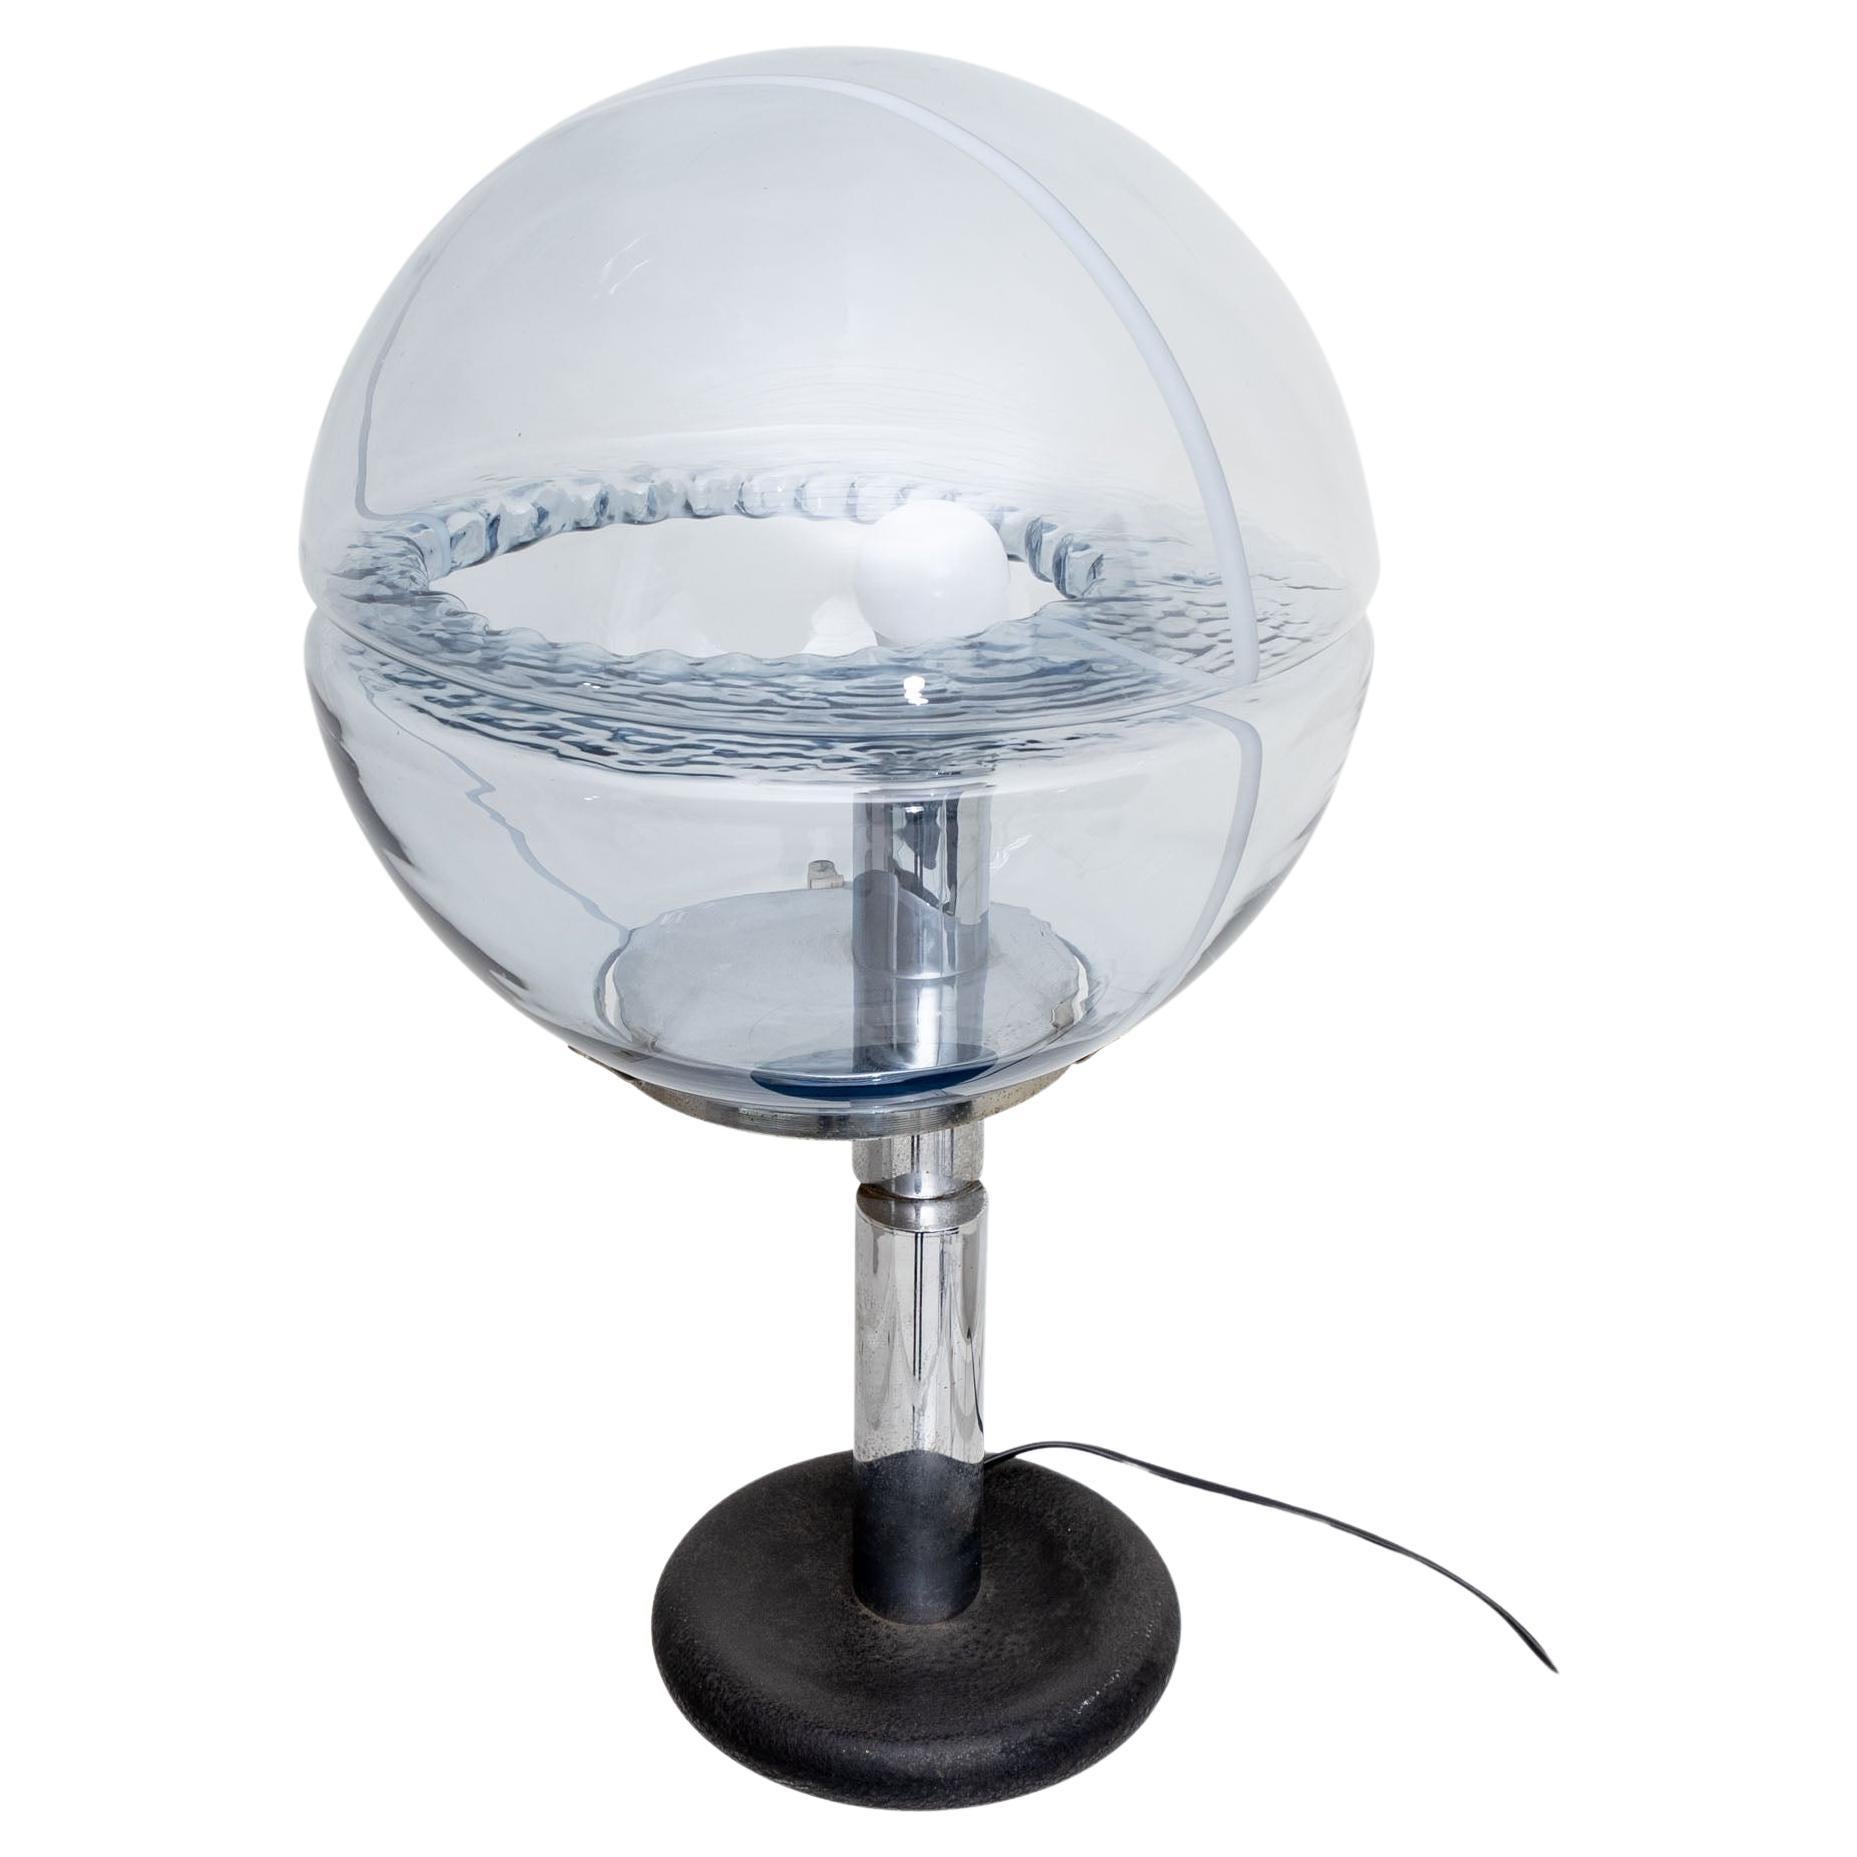 Table lamp with spherical blue tinted glass shade with white stripe decoration and horizontal incision with wavy texture. The large glass shade rests on a tripartite cylindrical stem in chromed metal and a round disc base in iron.